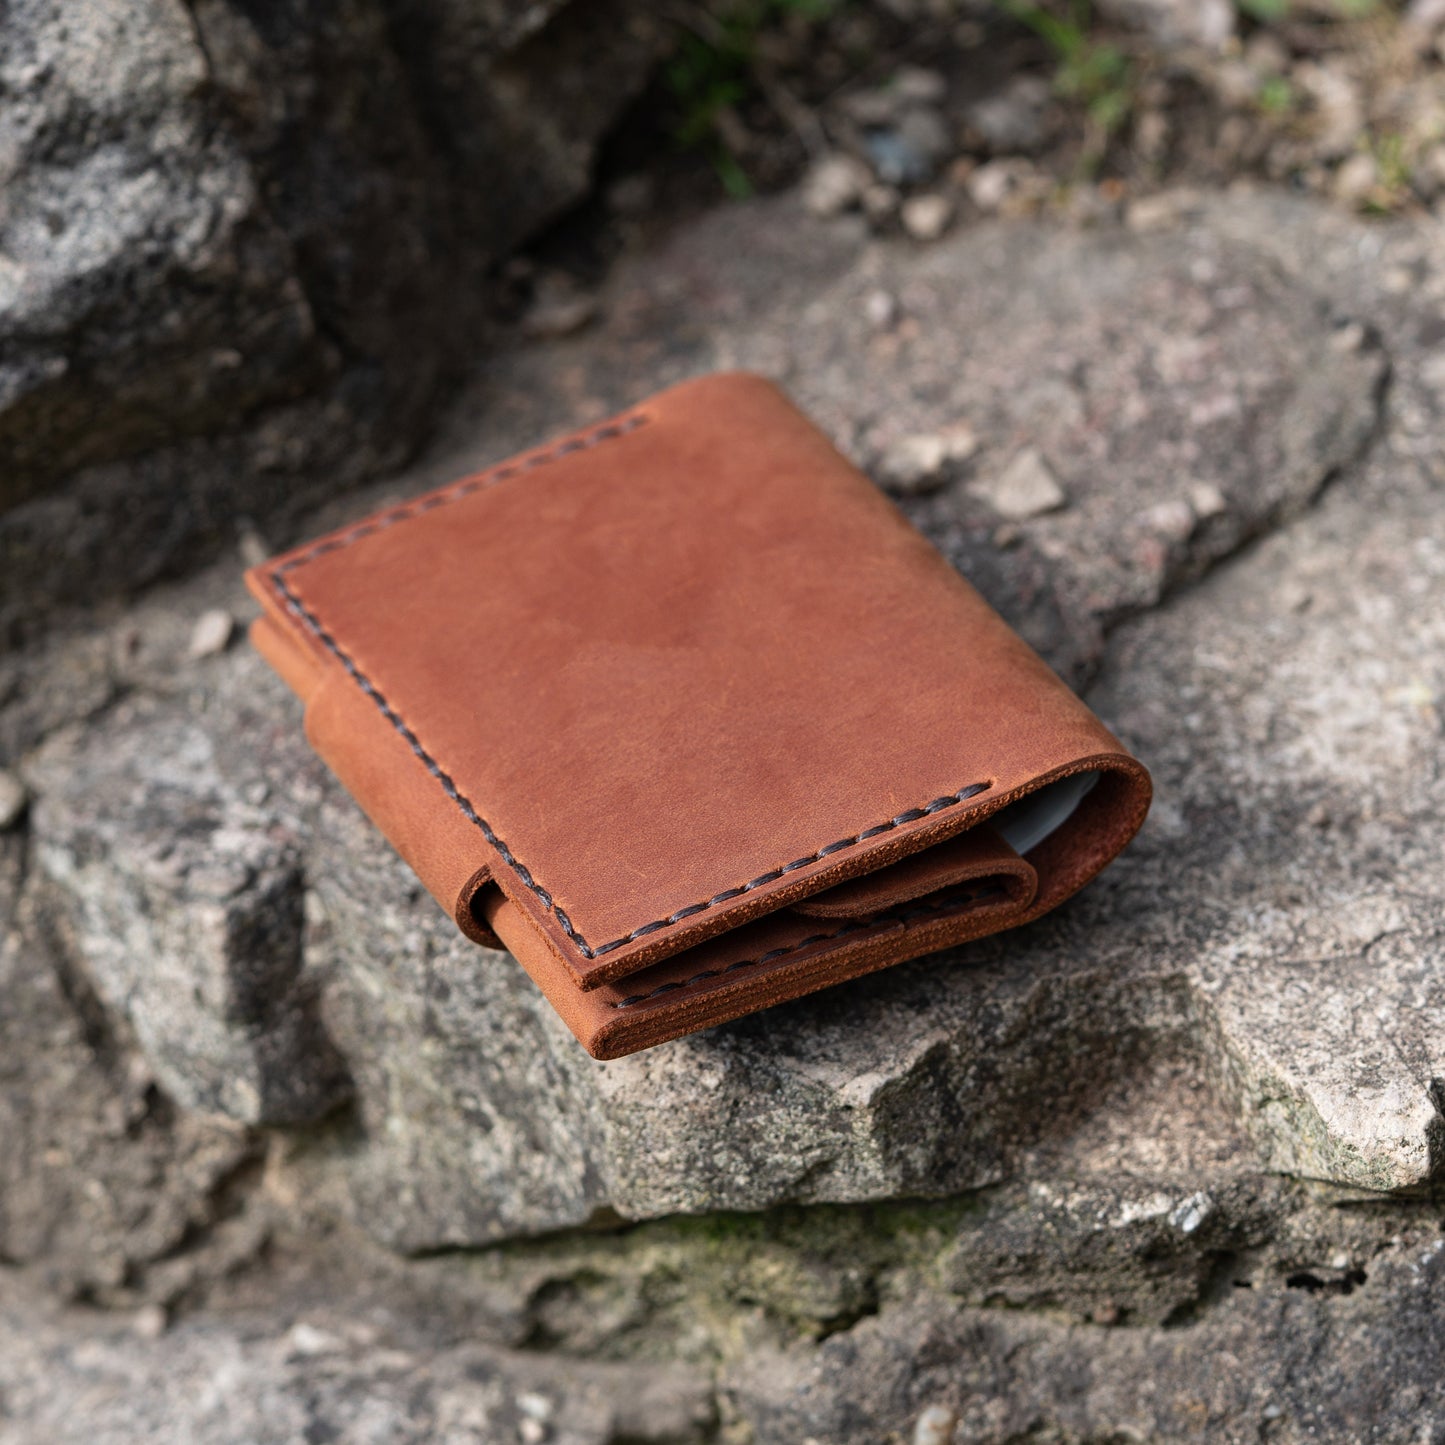 Minimalist Leather Wallet with Coin Pouch - Hand-Stitched, Card & Cash Compartments - Compact Design